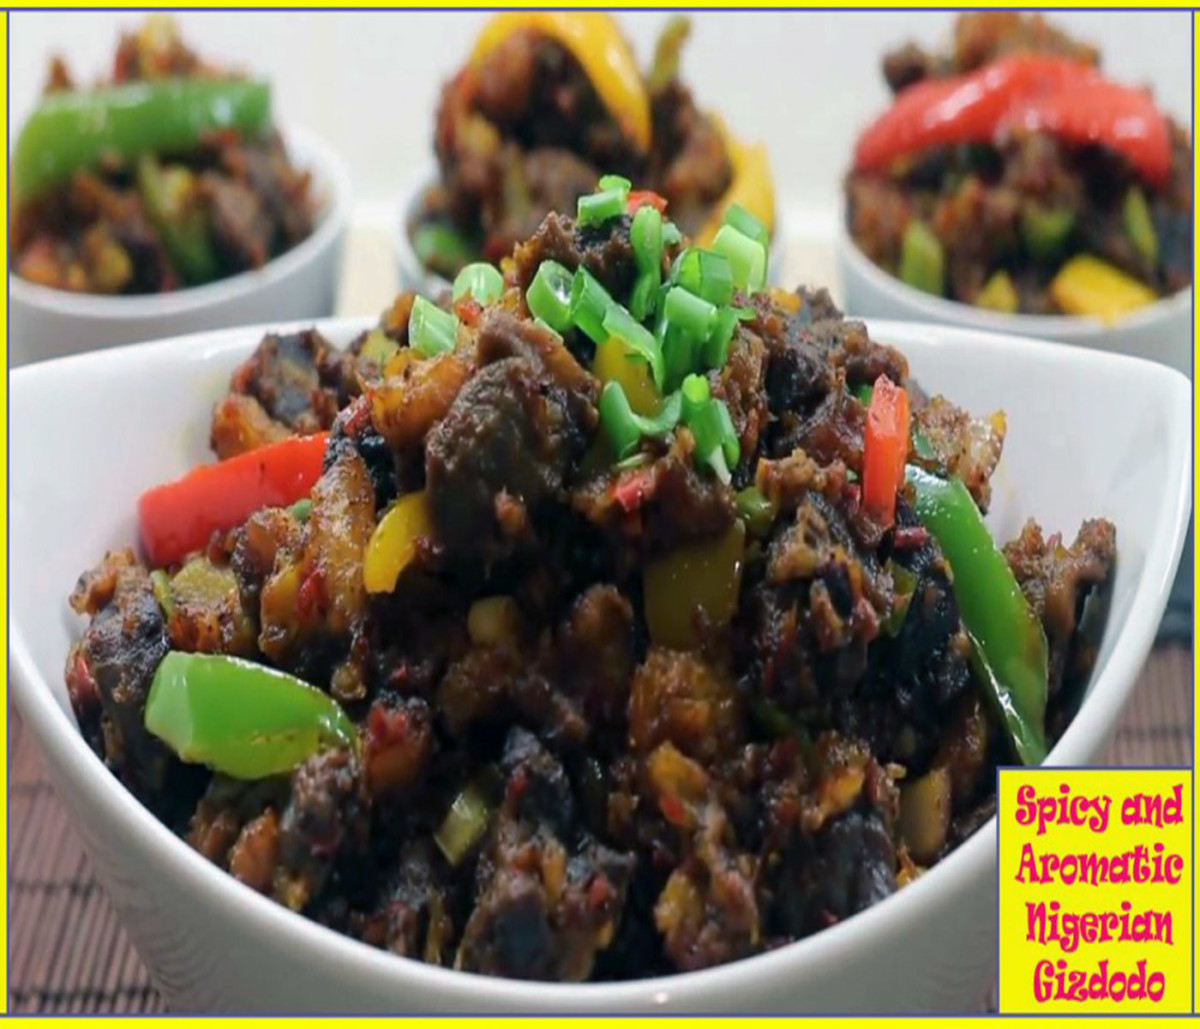 A mouth-watering serving of the spicy and aromatic Gizdodo